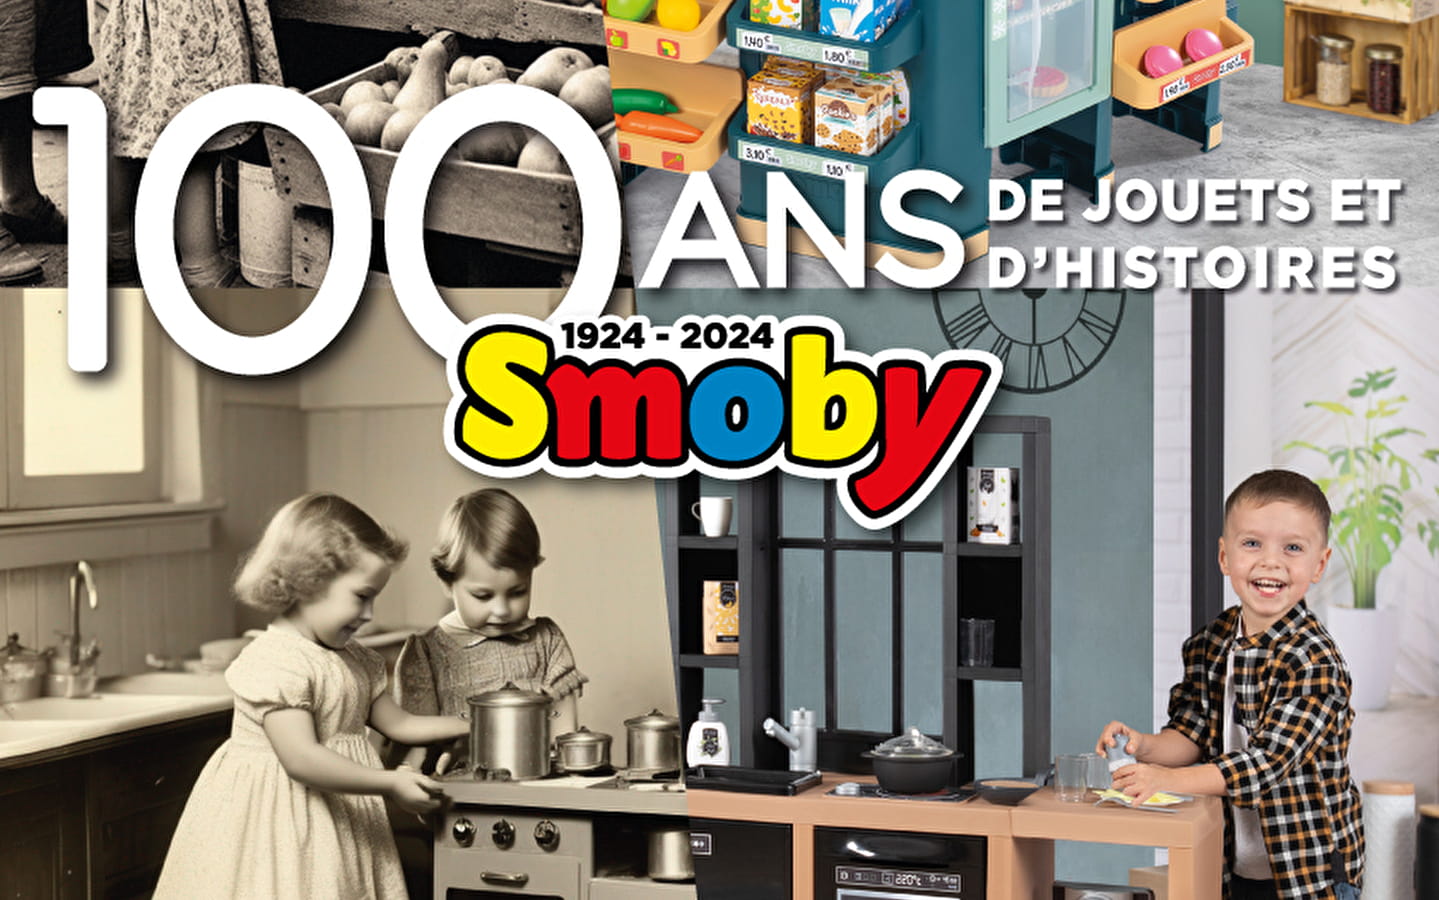 100 years of Smoby exhibition